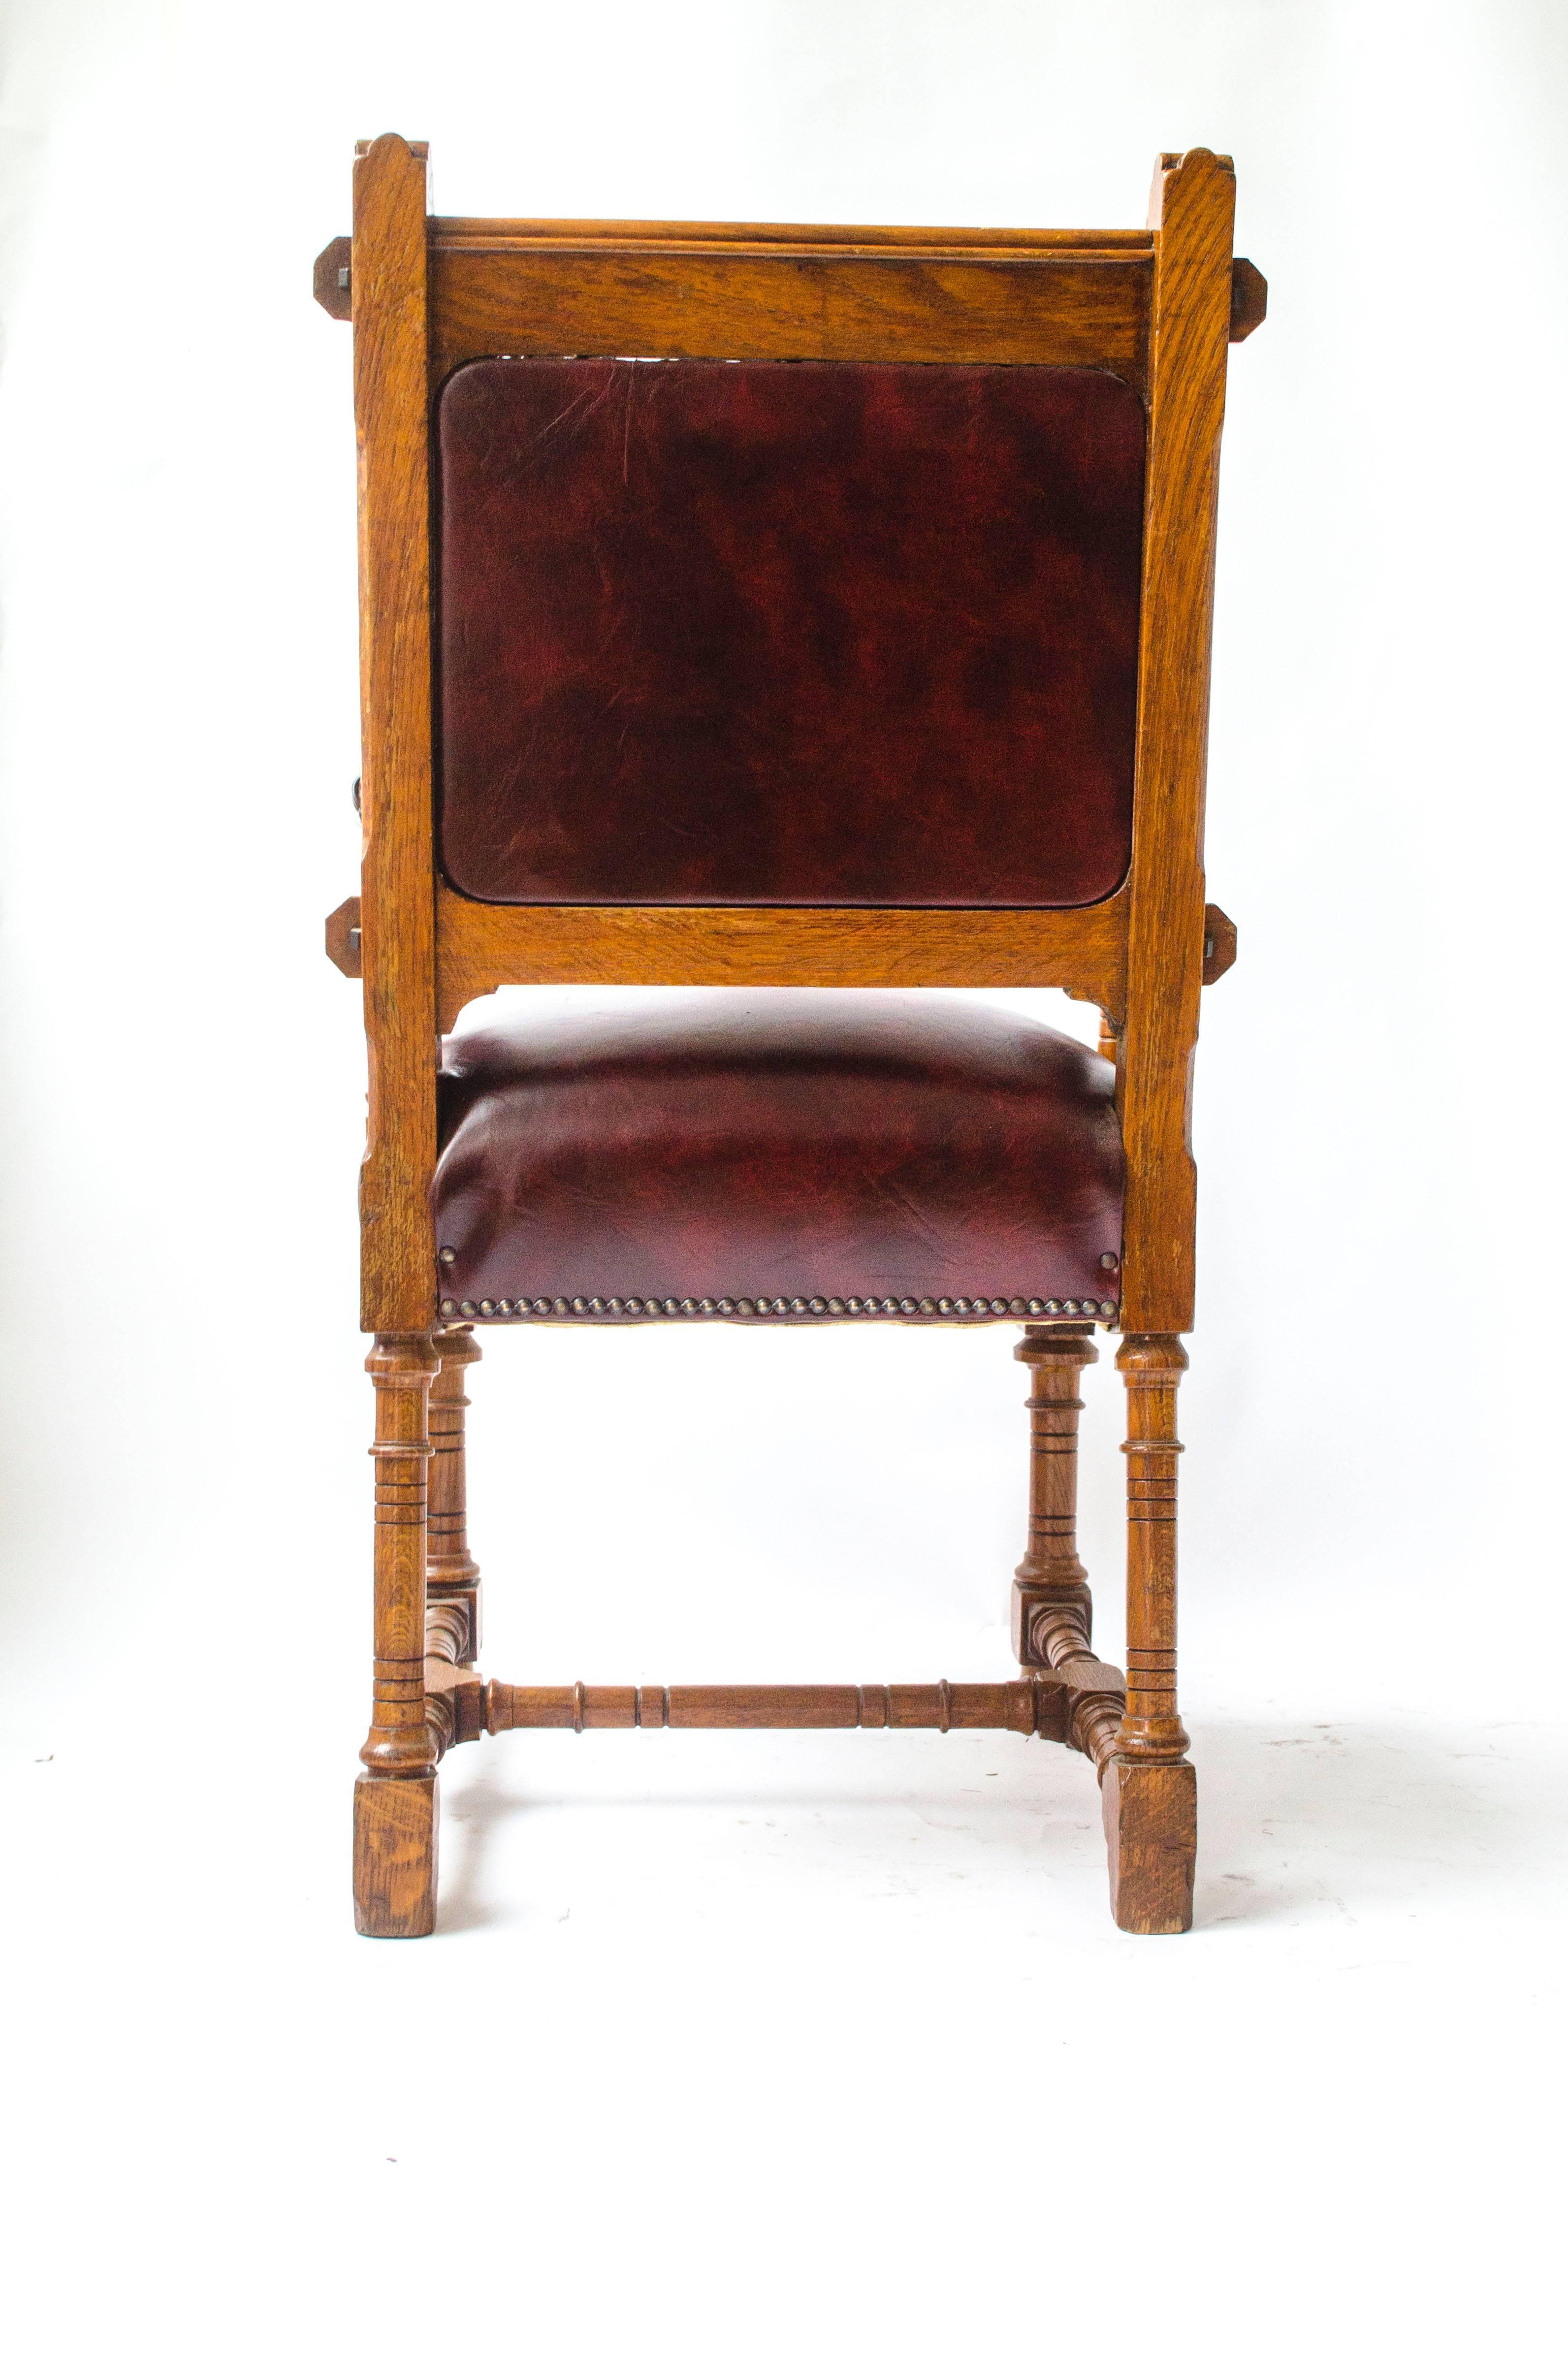 gothic revival furniture for sale